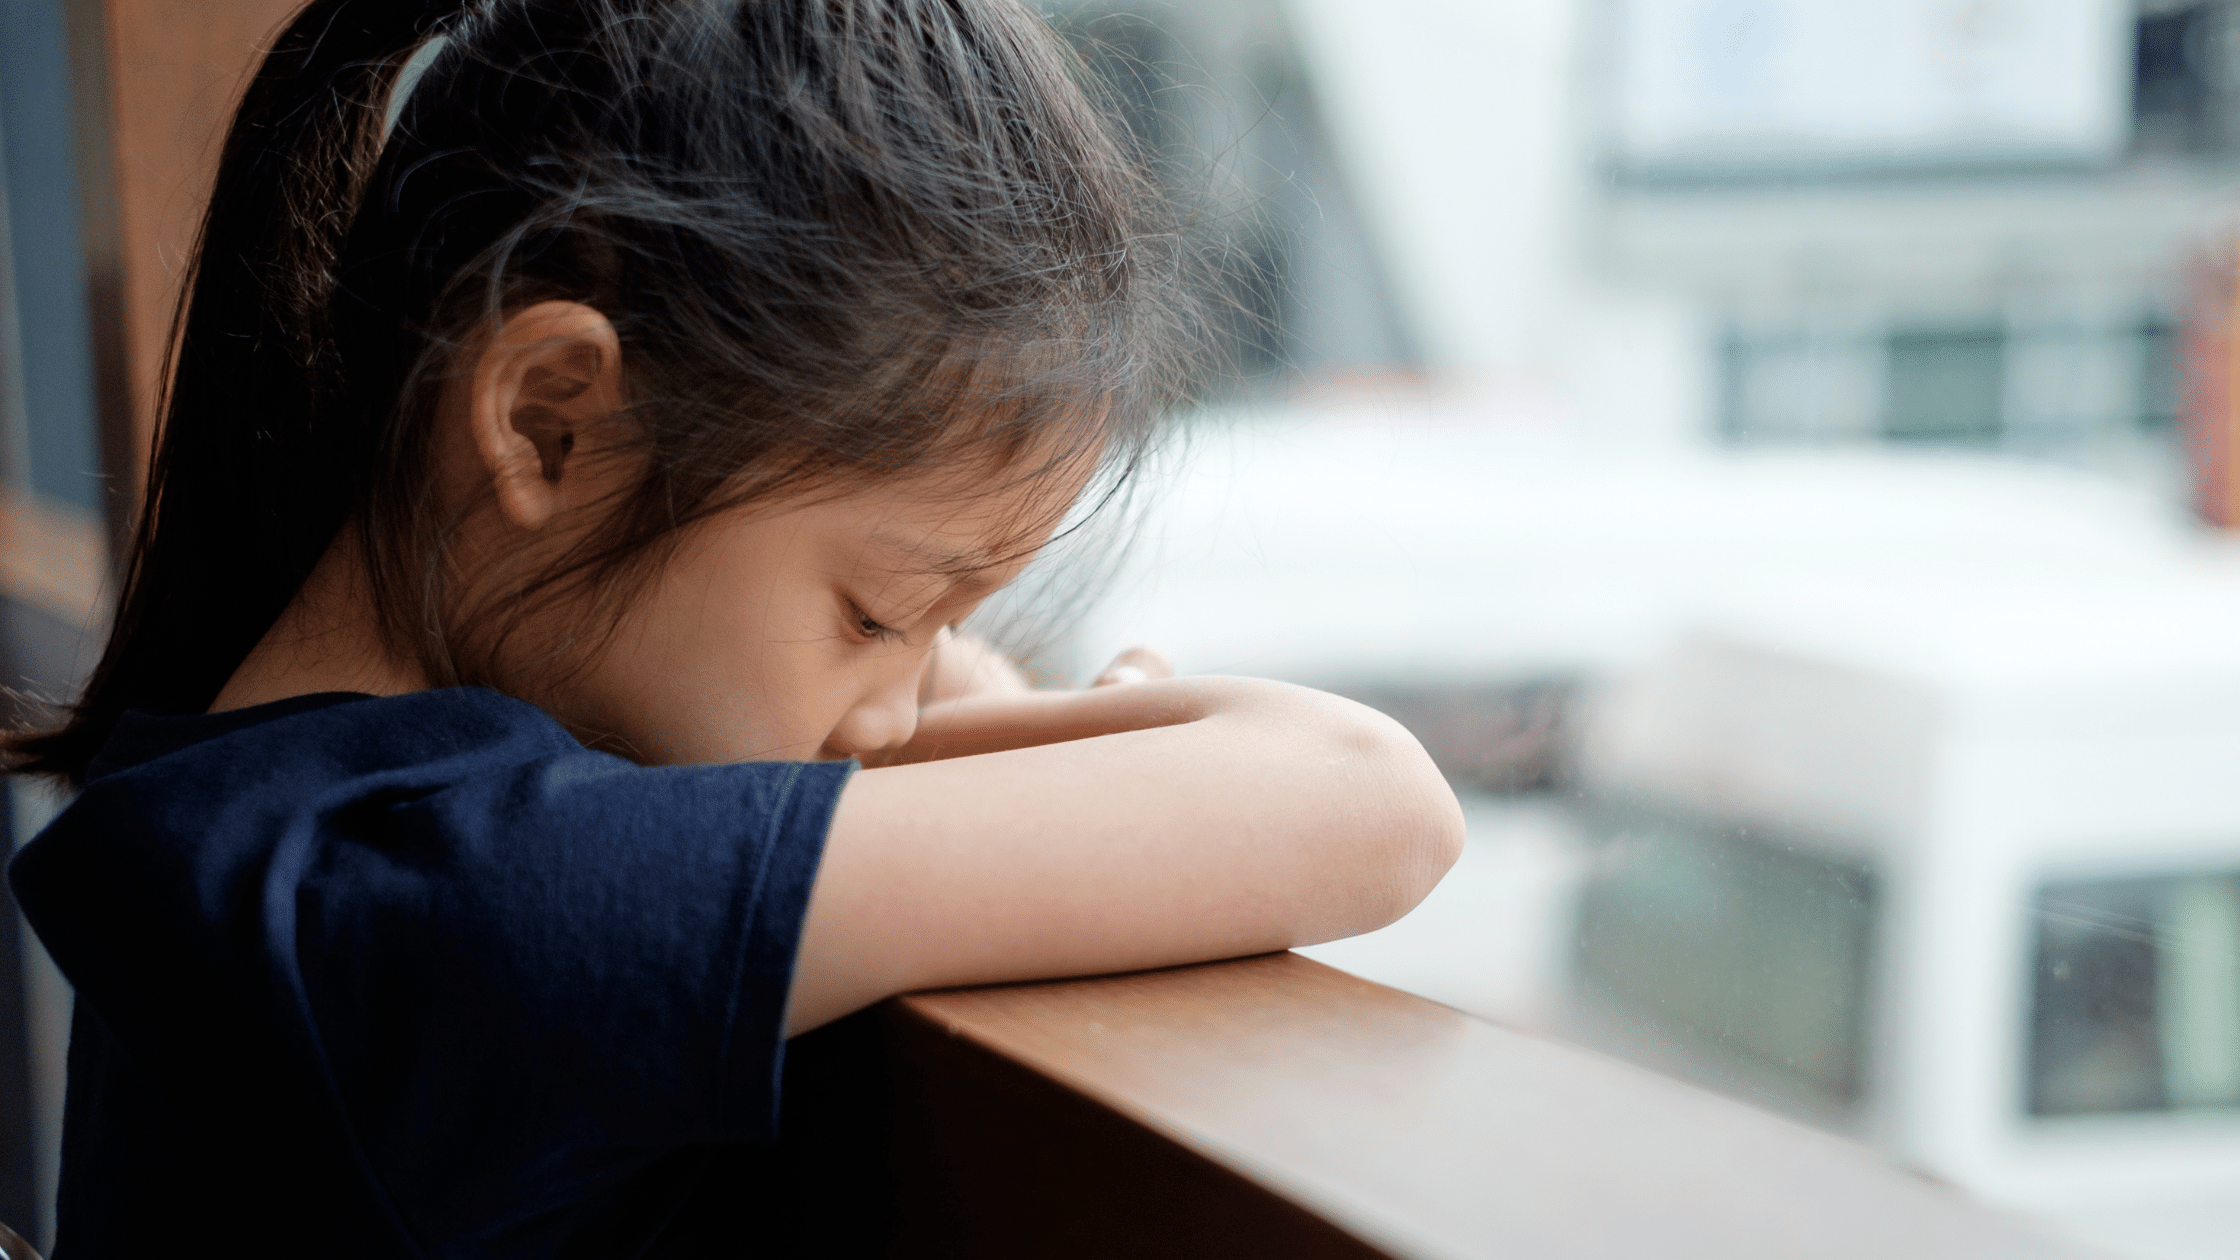 Assisting Children To Cope With Grief